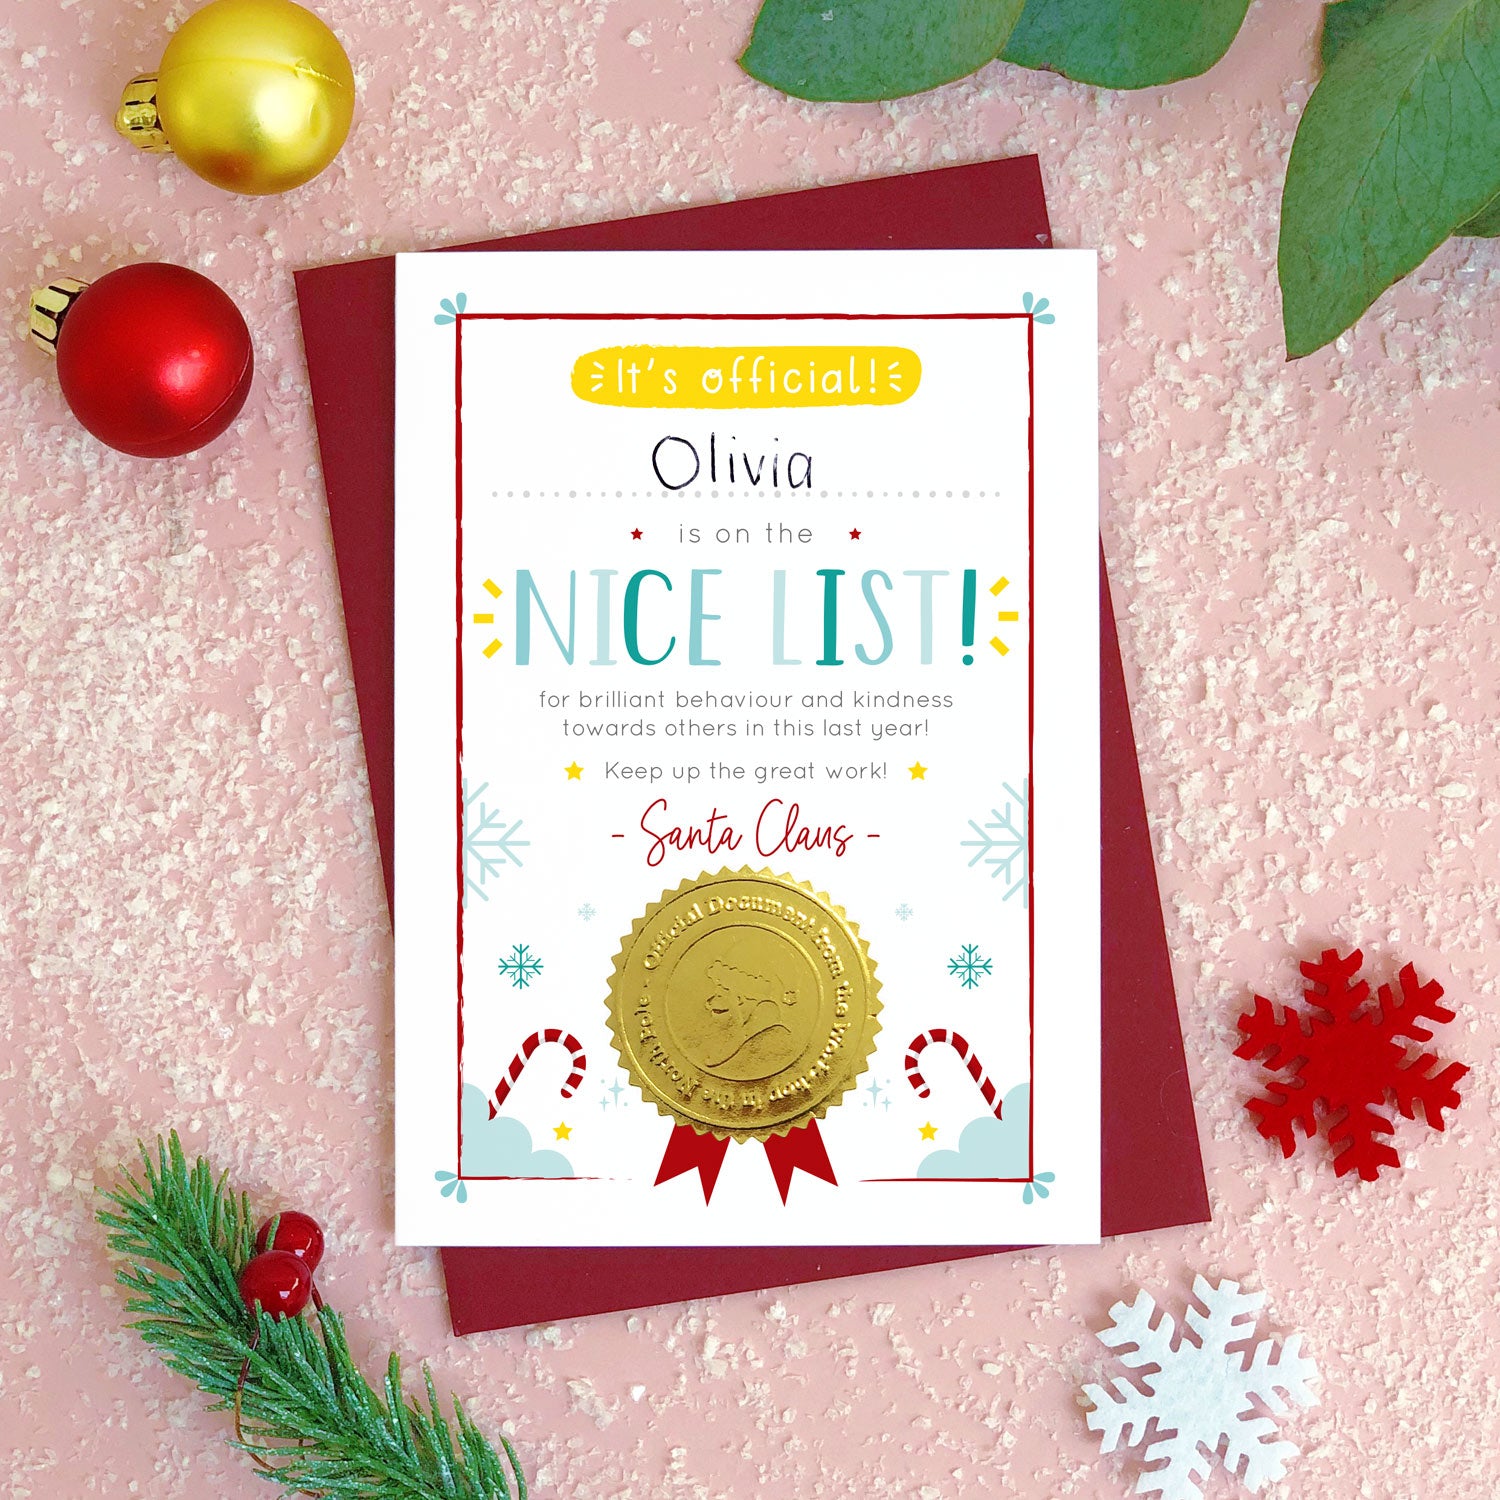 A nice list certificate card photographed flat lay style on top of a pink background covered in ‘snow’, pieces of foliage, snowflakes and a bauble. The card has a blank space for you to hand write a childs name and in this example a biro has been used to show this. It also features a shiny gold seal with the face of a santa character.